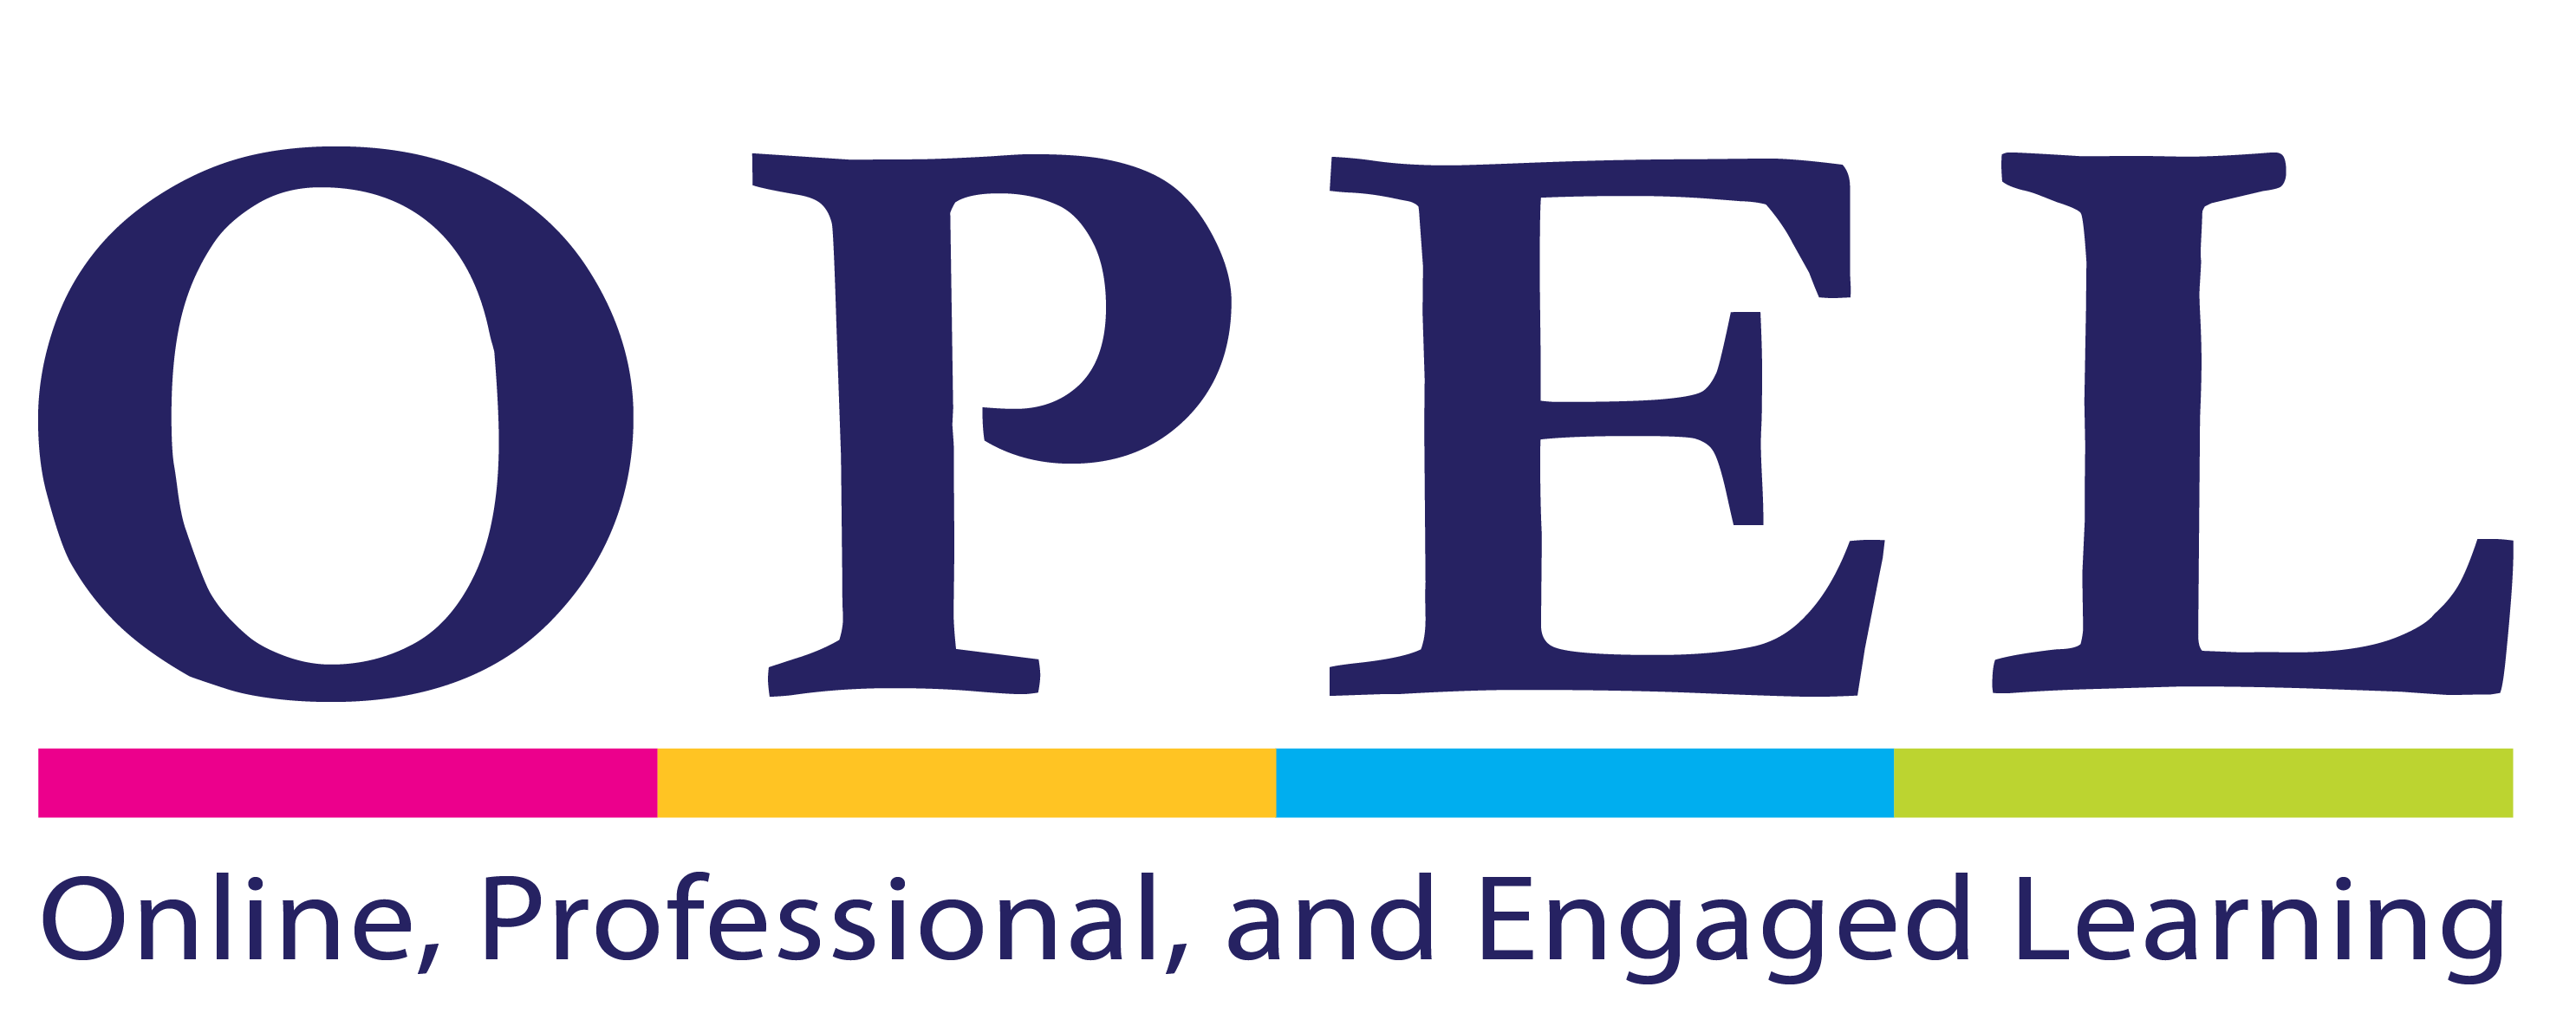 online professional and engaged learning logo